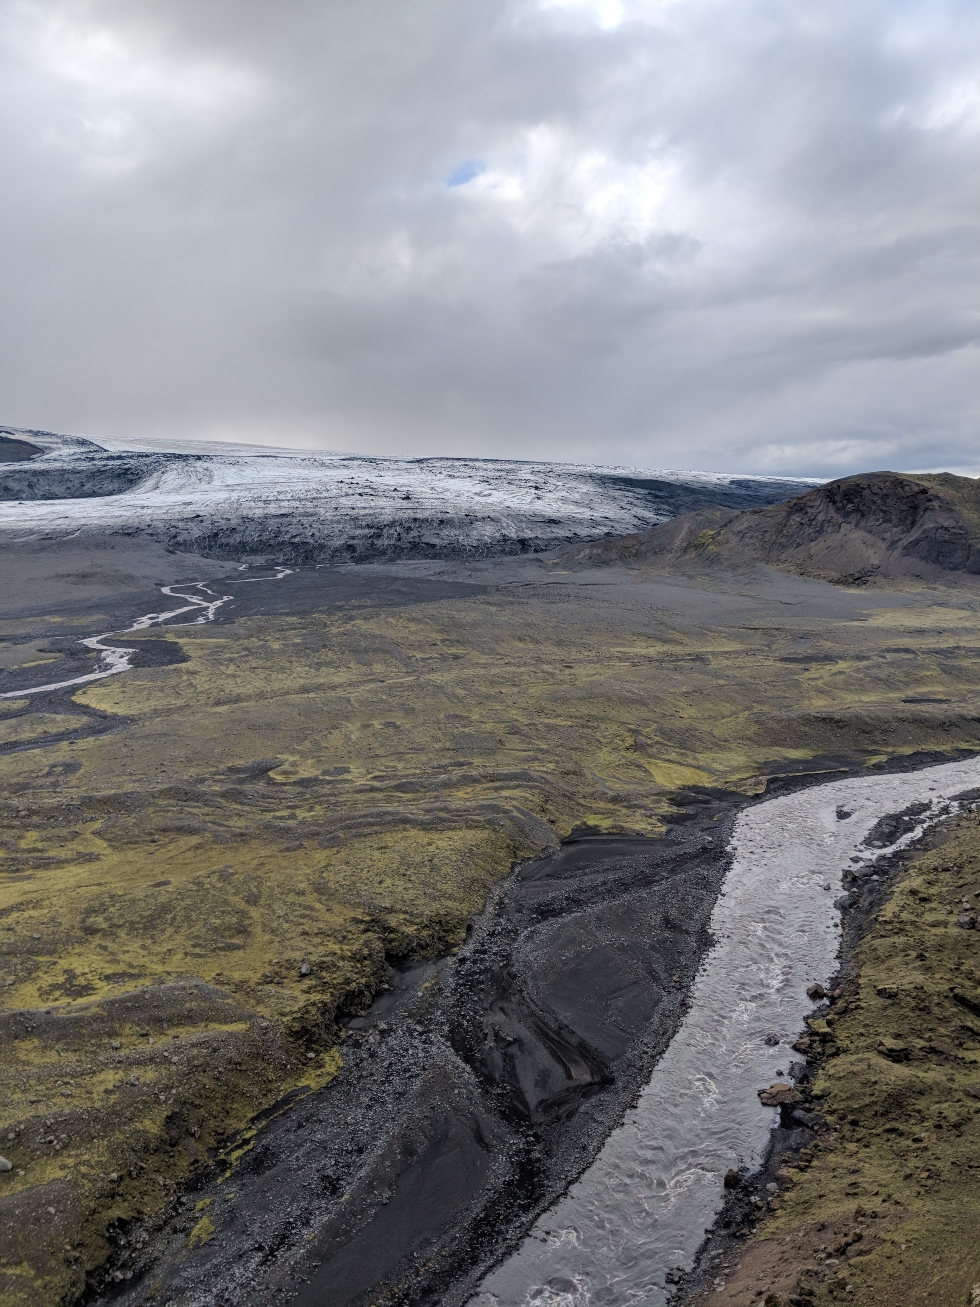 This is a picture of Öldusfellsjökull, an outlet glacier in southern Iceland. In front of the glacier a variety of glacial features can be seen: the two rivers in the image are fed by glacial meltwater (these create a variety of channelized sandy features – the black sediments on the bottom centre of the image), in the middle of the photo a variety of frontal and push moraines can also been seen (these were formed along ancient ice margins and tell us how much the glacier has retreated). 